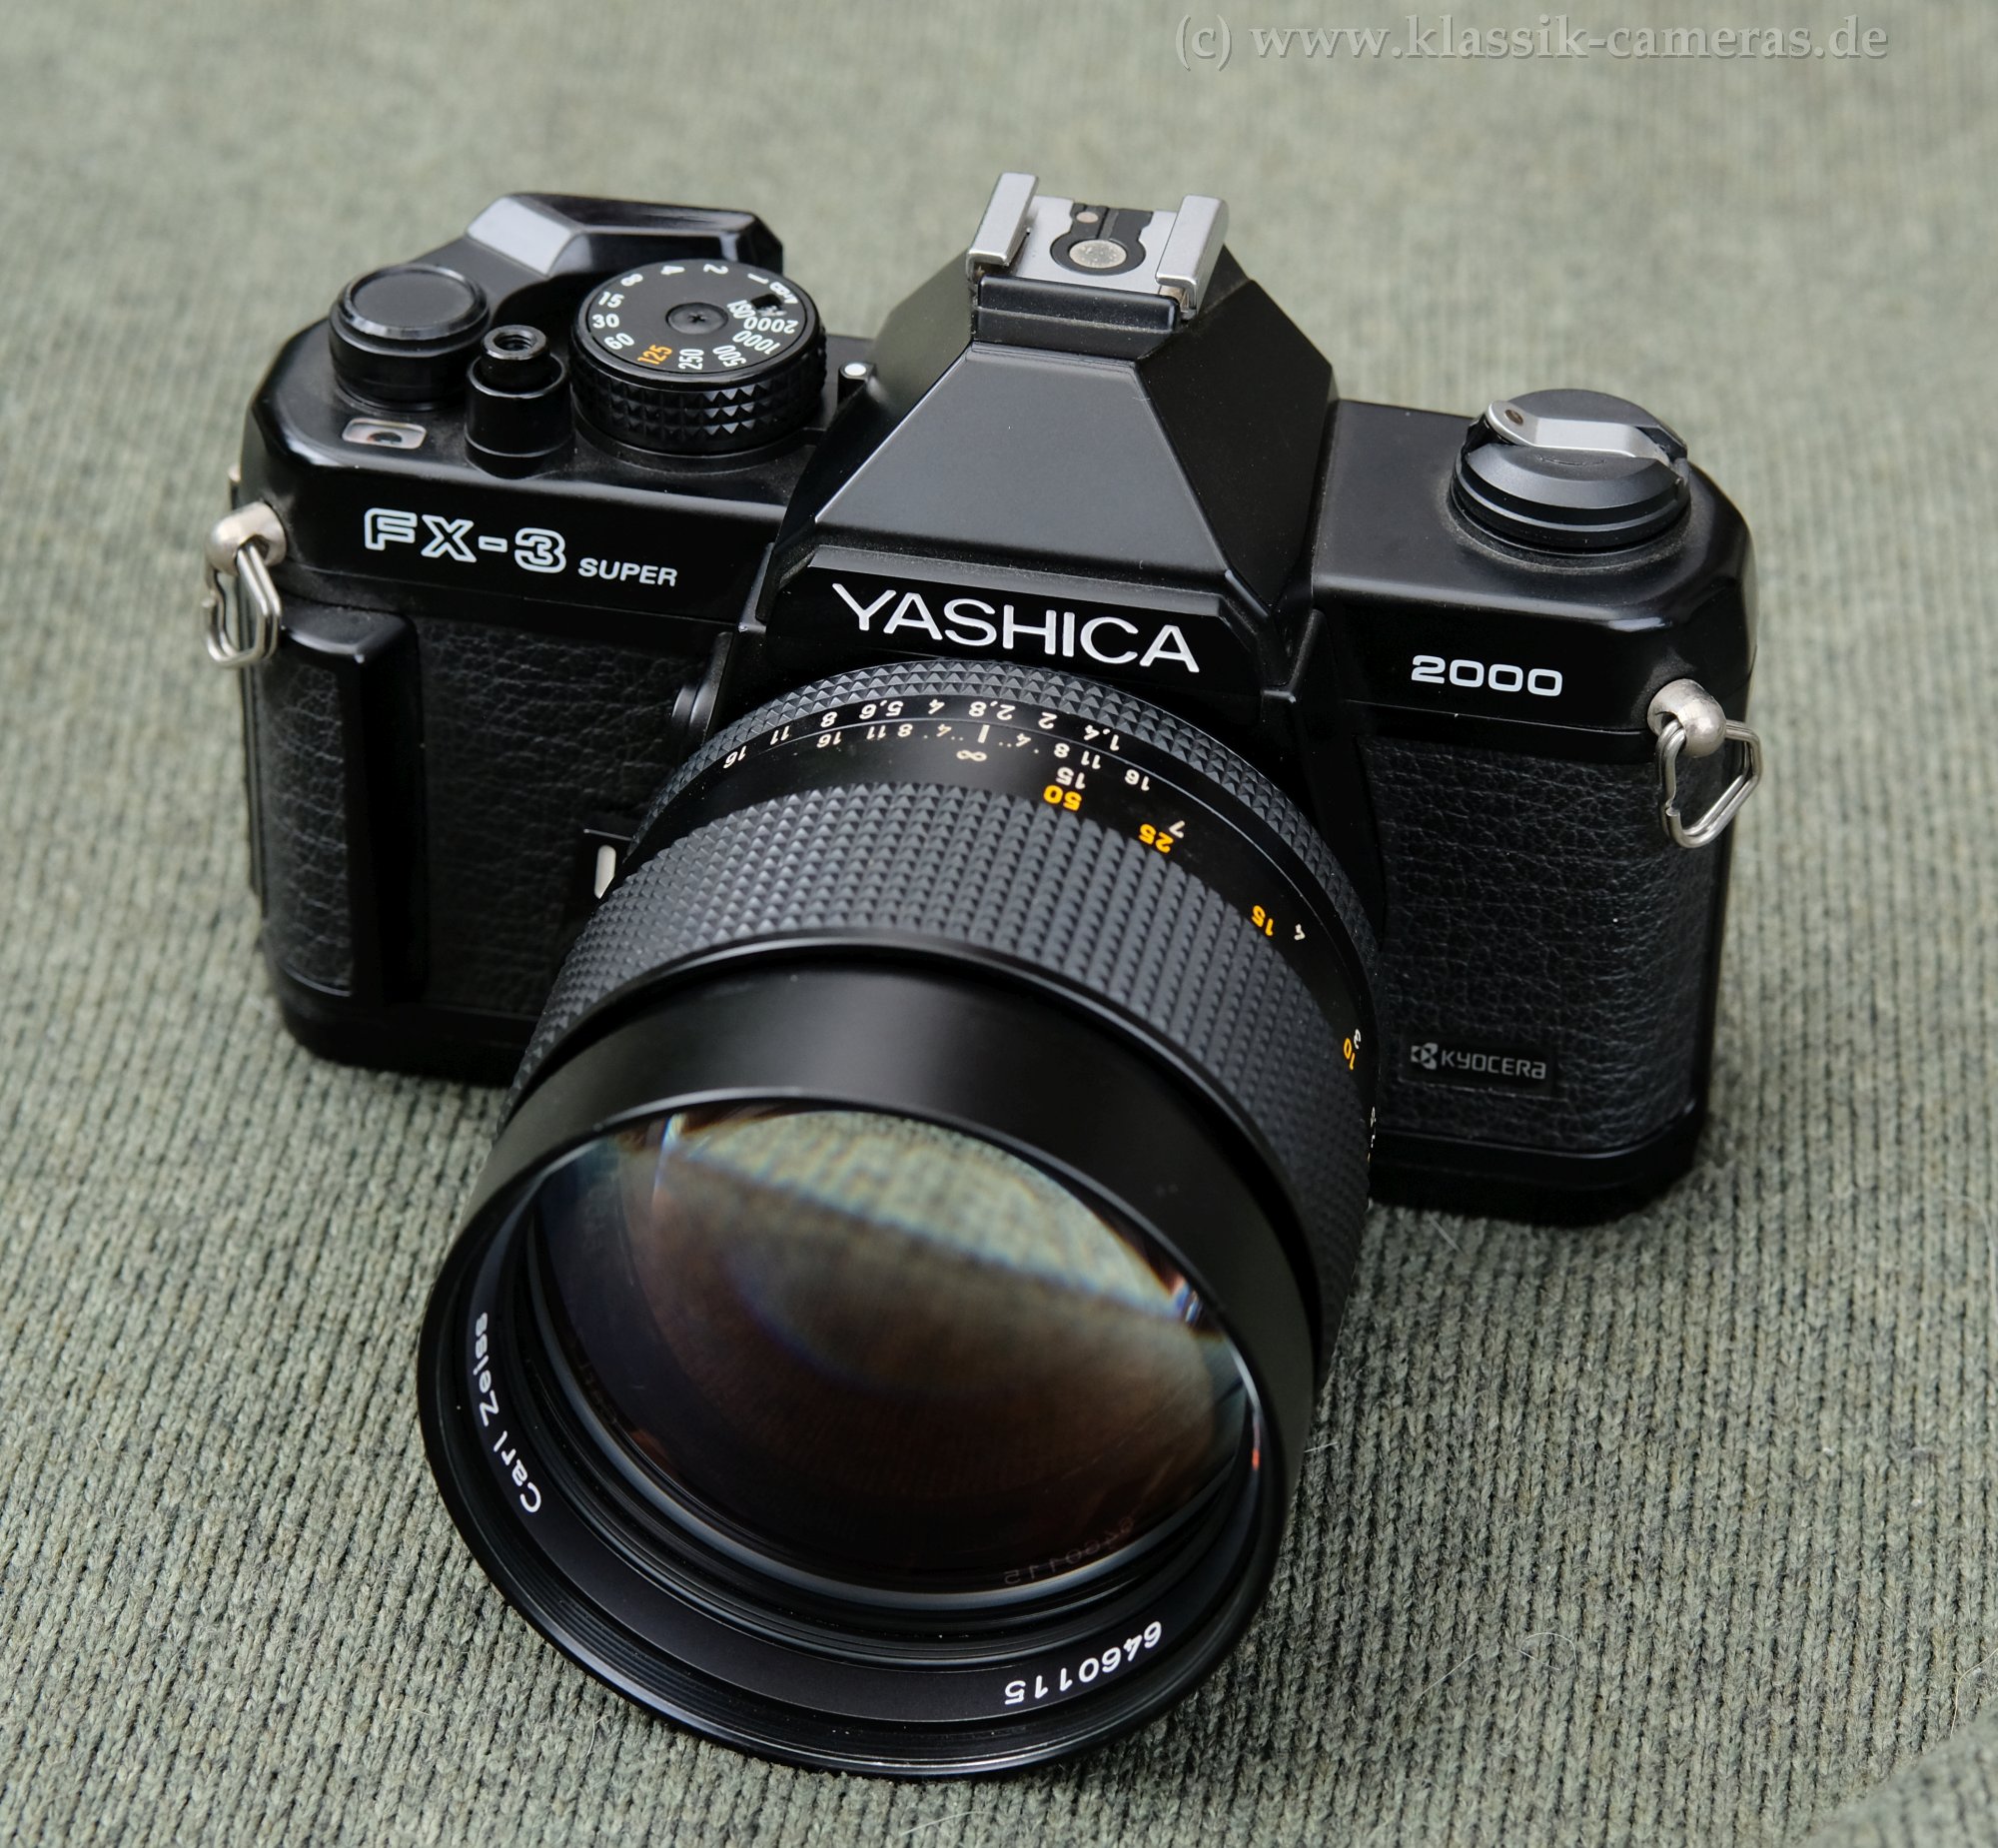 Yashica FX-3
            with Zeiss Planar 85/1.4